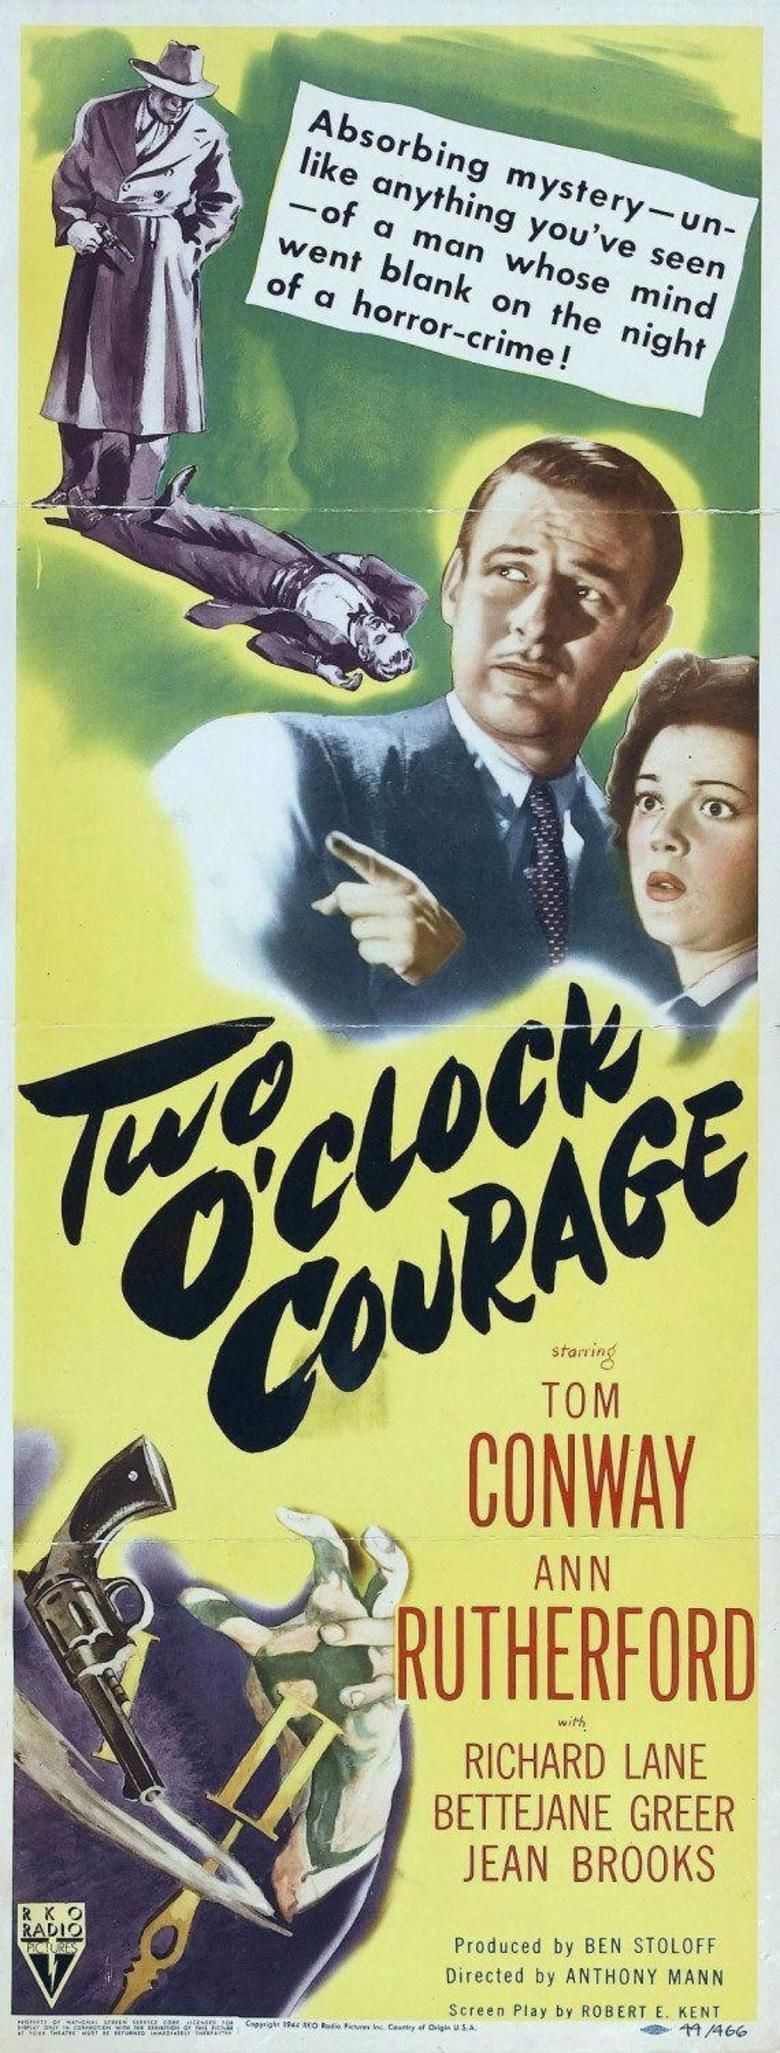 Two OClock Courage movie poster